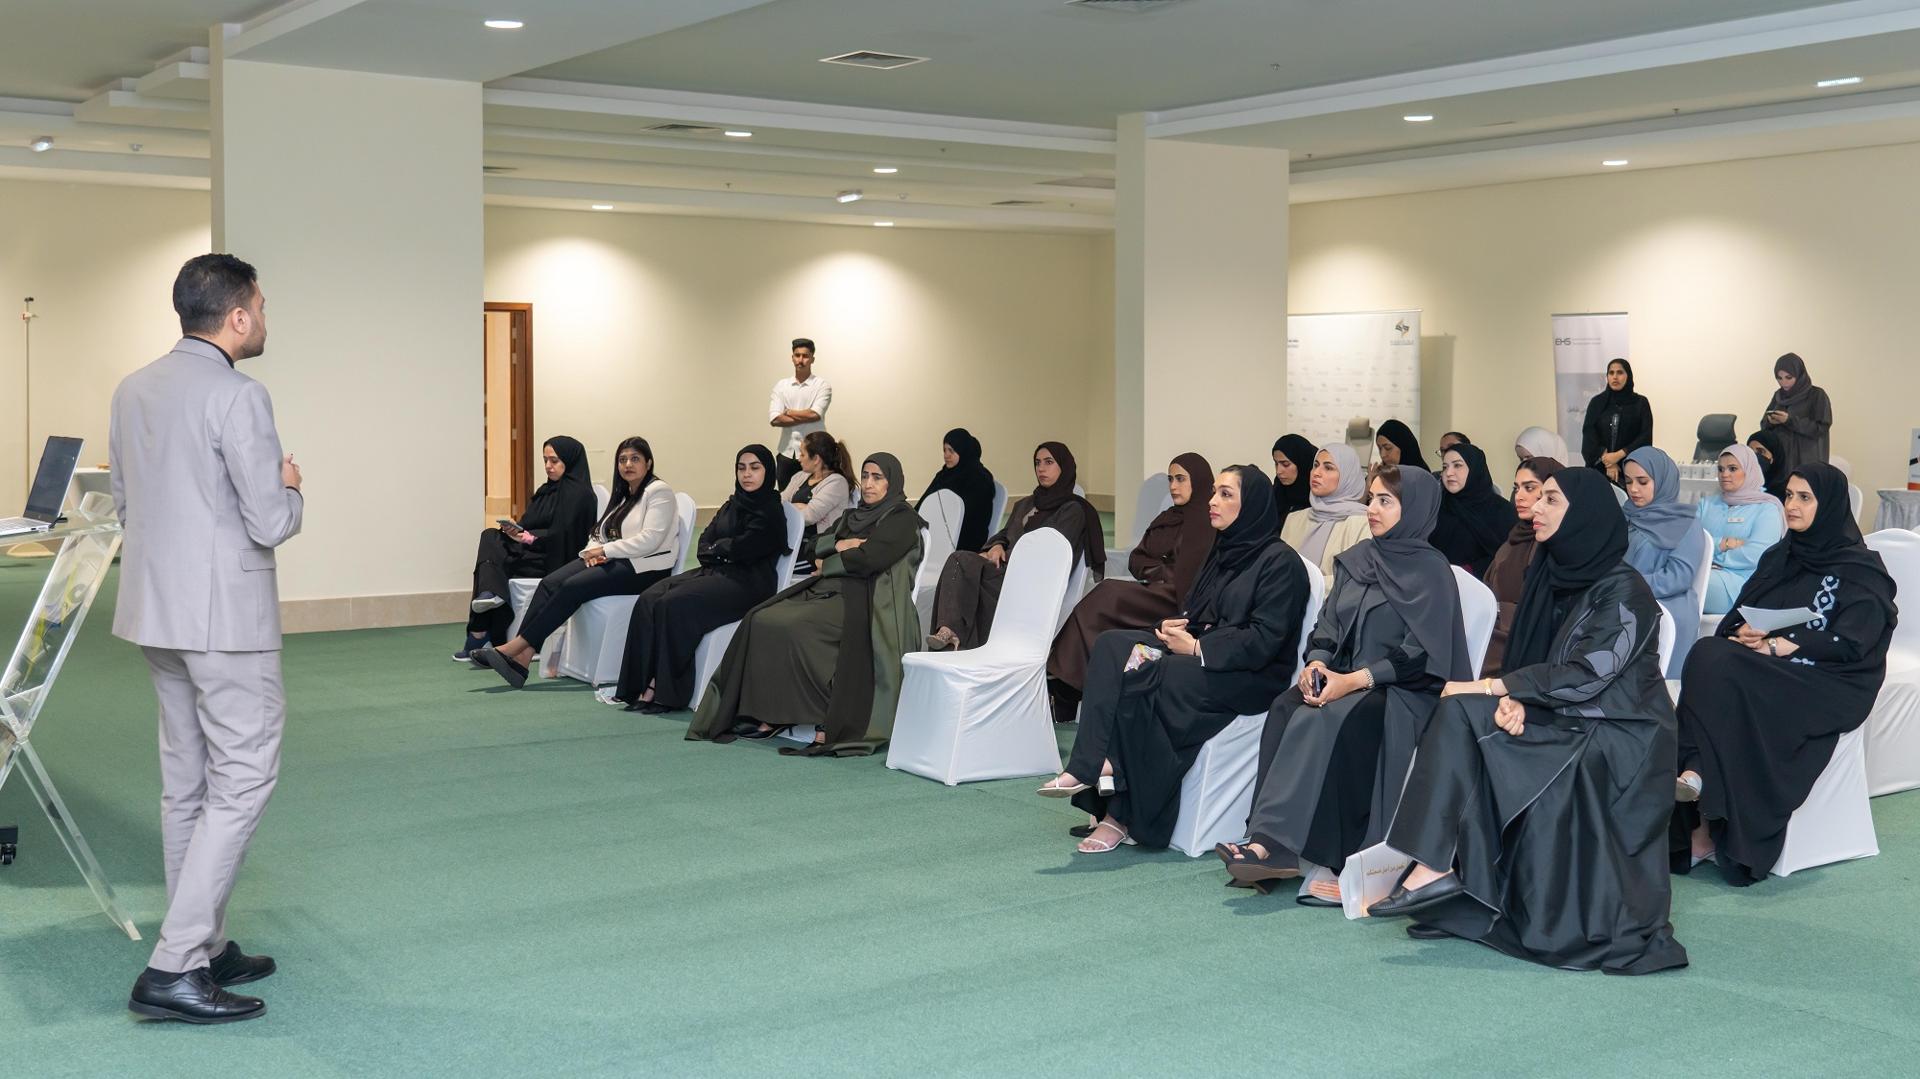 Ajbwc Launches The “30 Day Challenge Competition” For Female Government Employees And Ajbwc Members